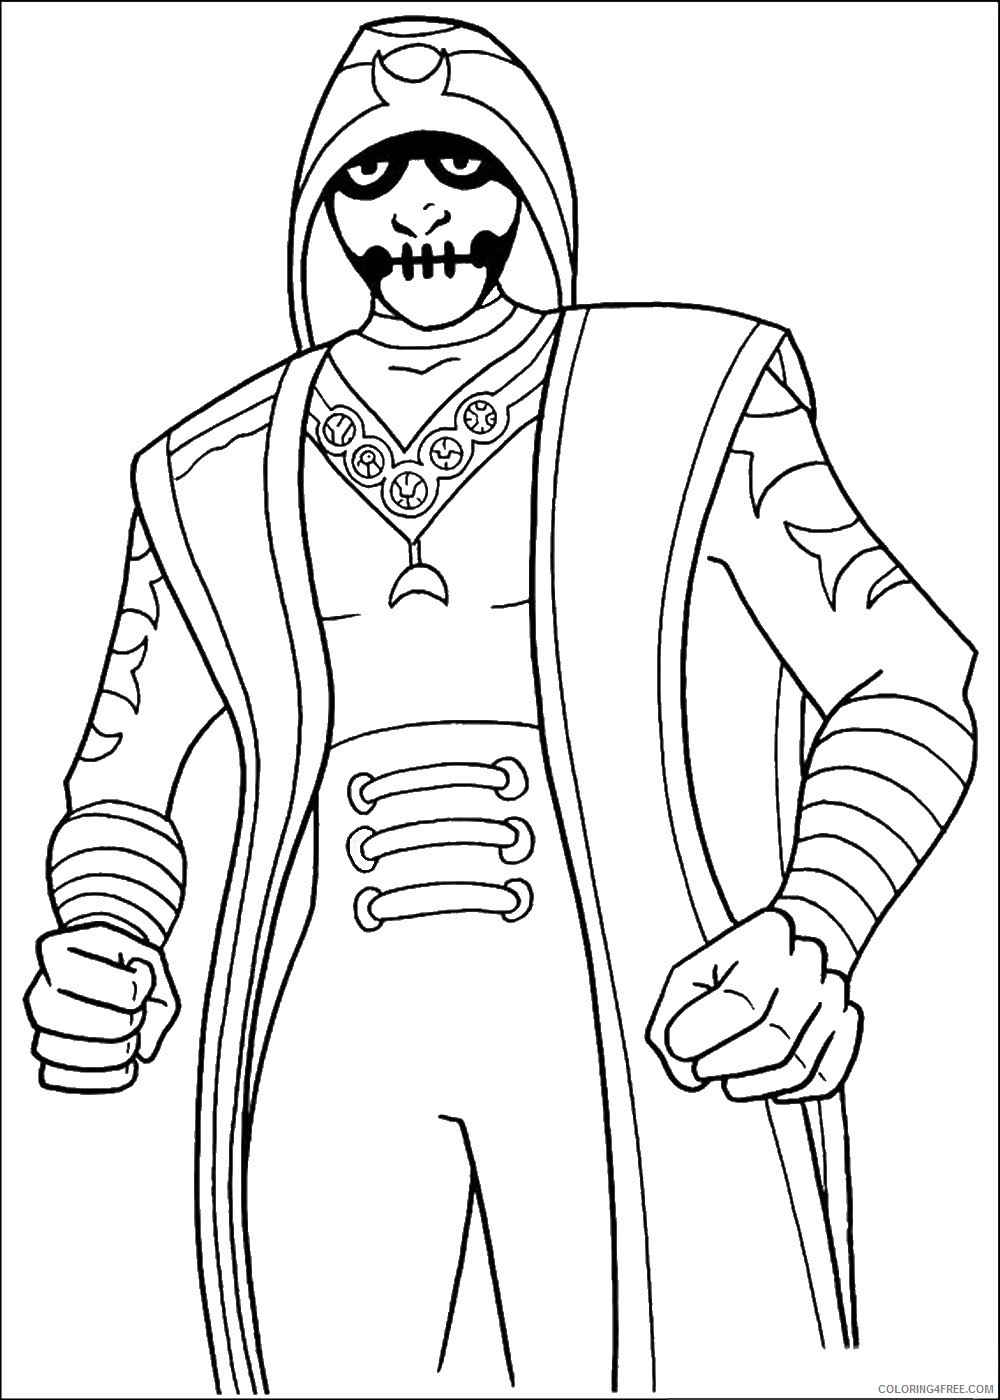 Ben 10 Coloring Pages Cartoons ben10 53 Printable 2020 1230 Coloring4free